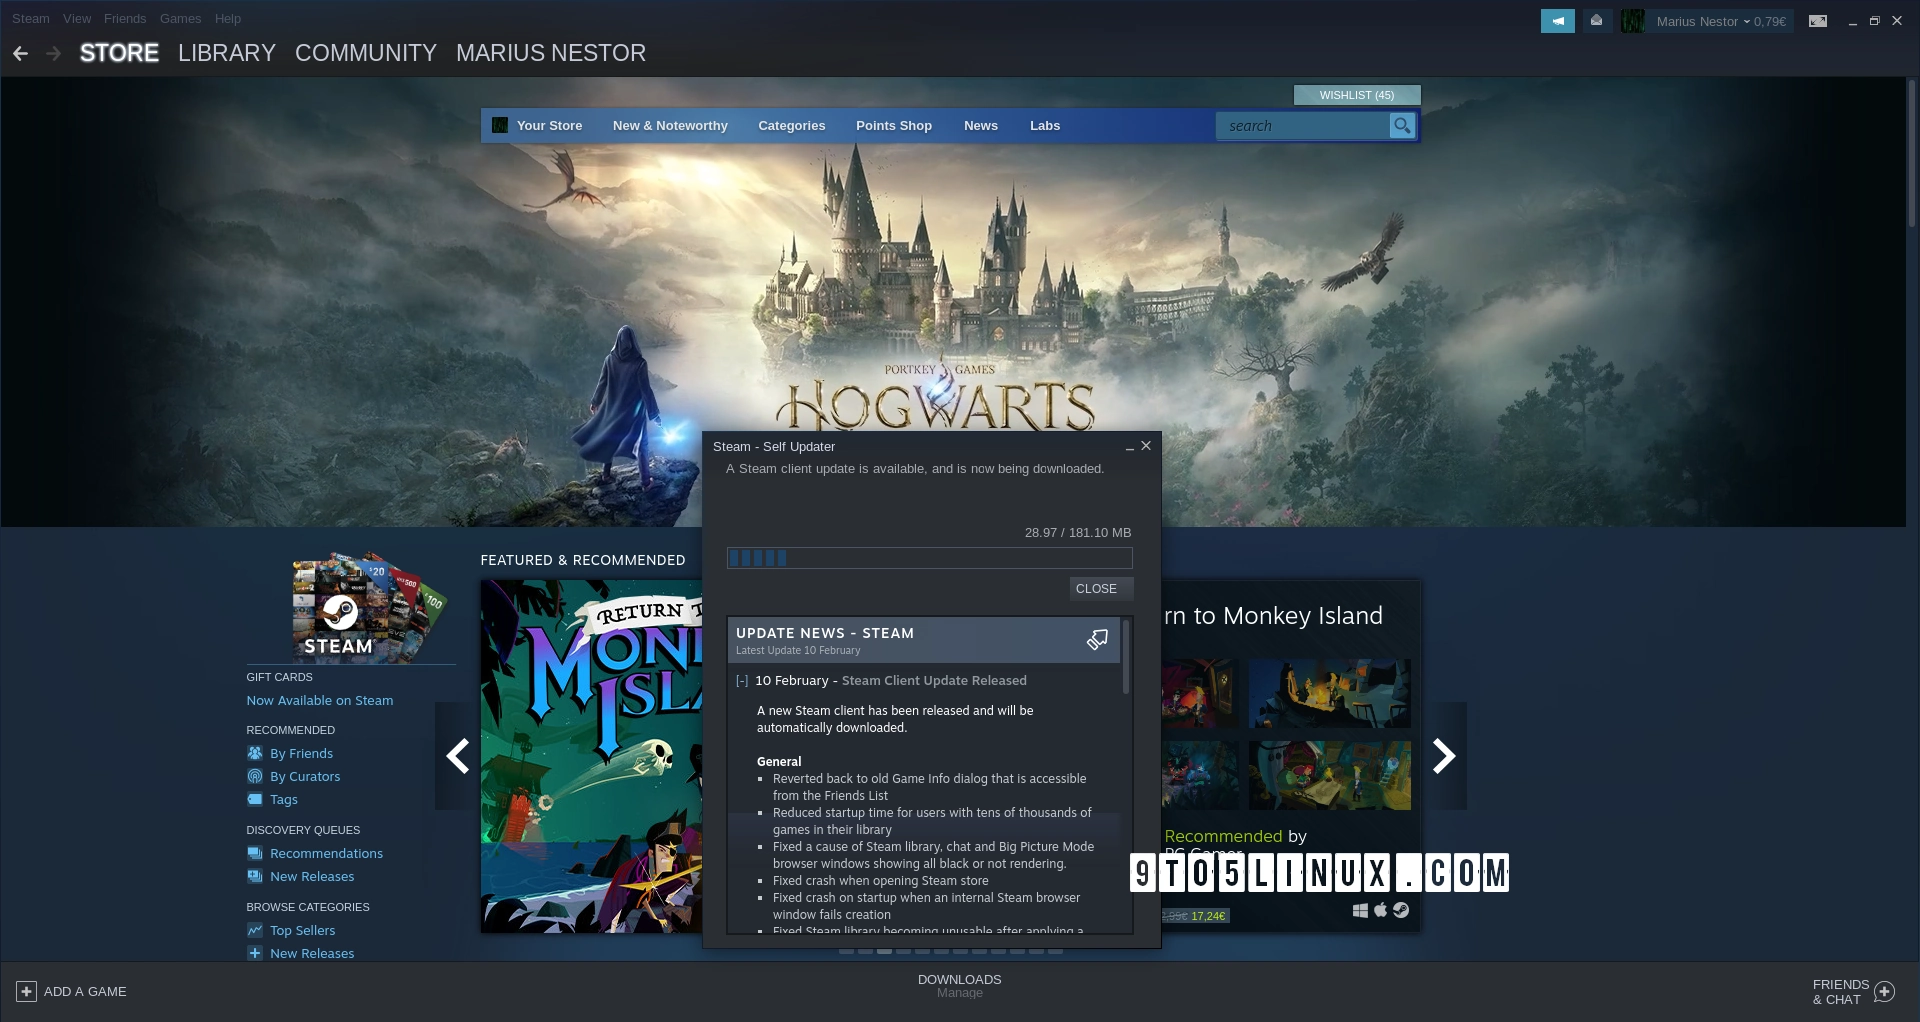 New Steam Client Update Further Improves the Big Picture Mode, Fixes More Bugs